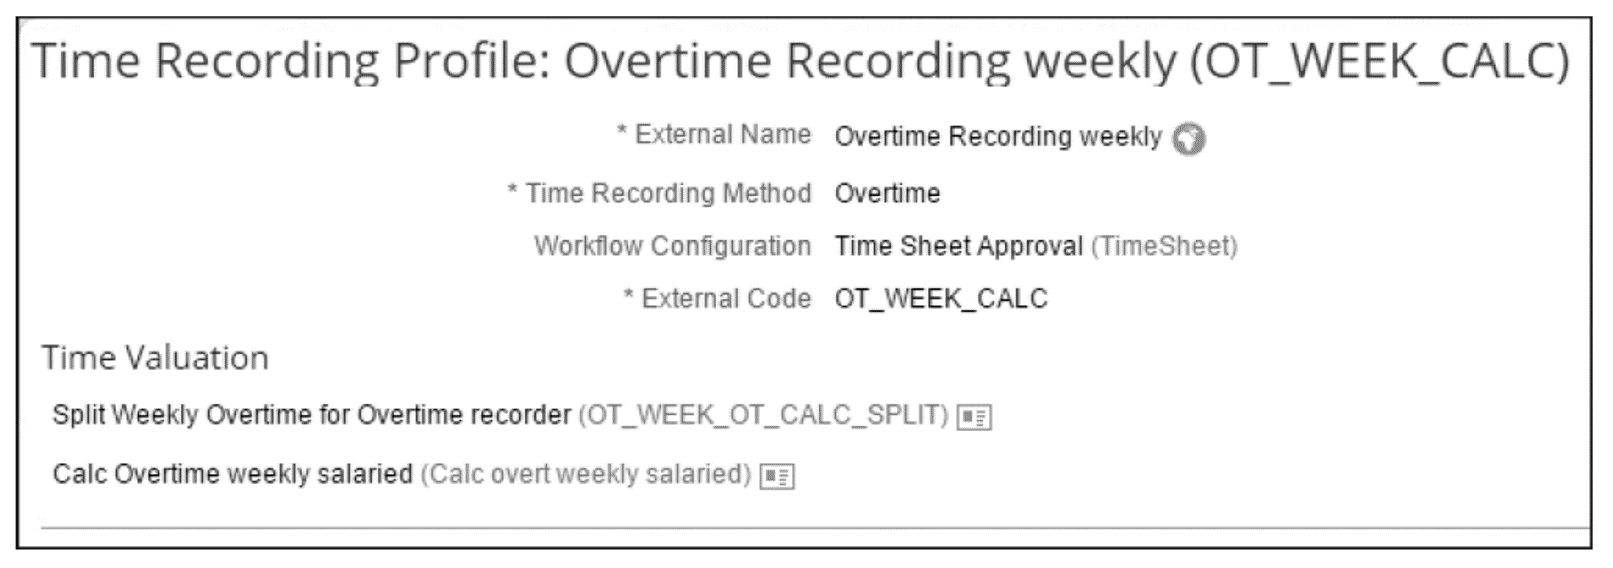 Time Recording Profile for Weekly Overtime Recording